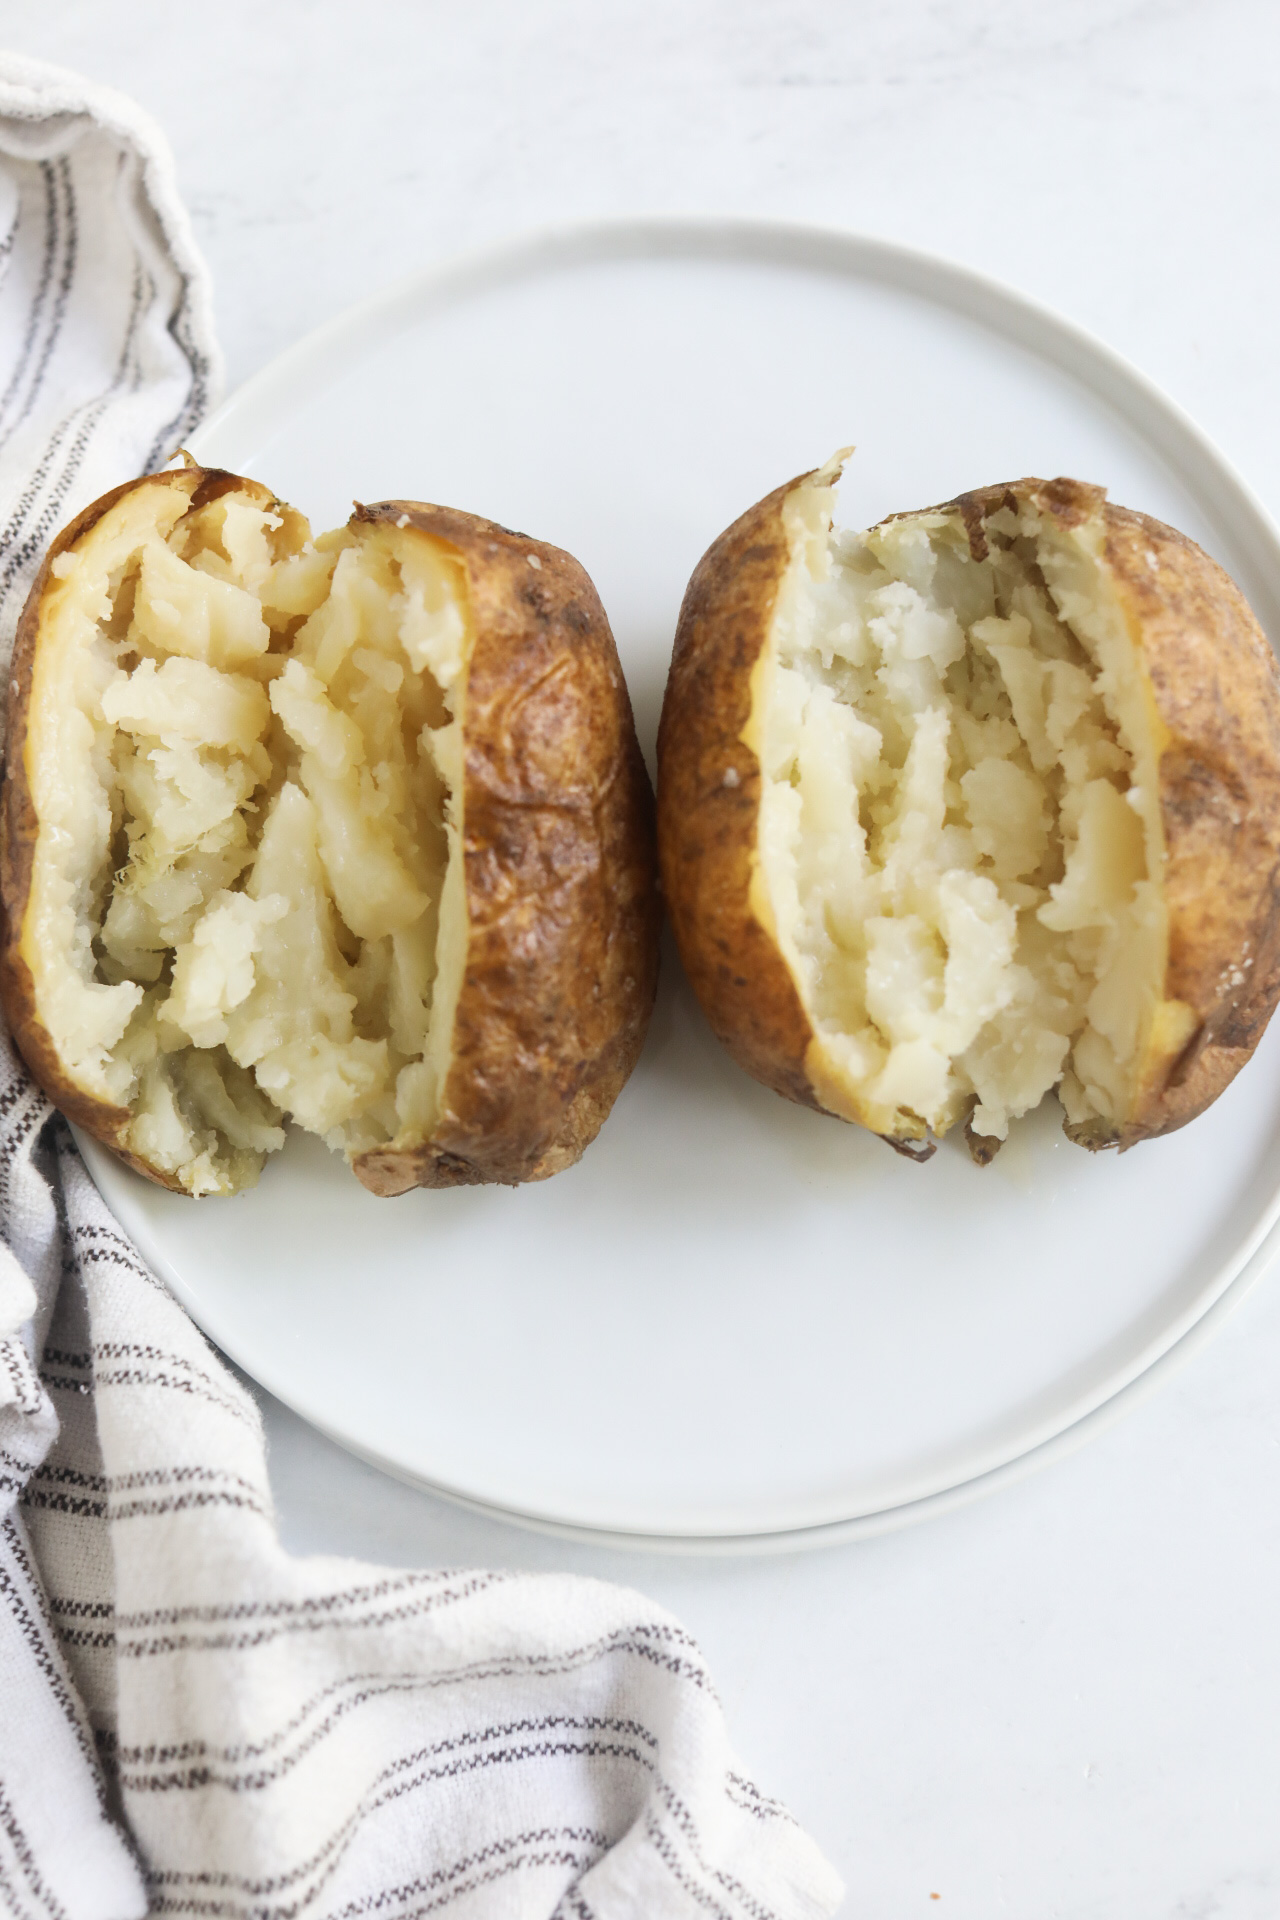 Plain baked potato sliced open and contents of potato fluffed with a fork before stuffing potatoes with chili.